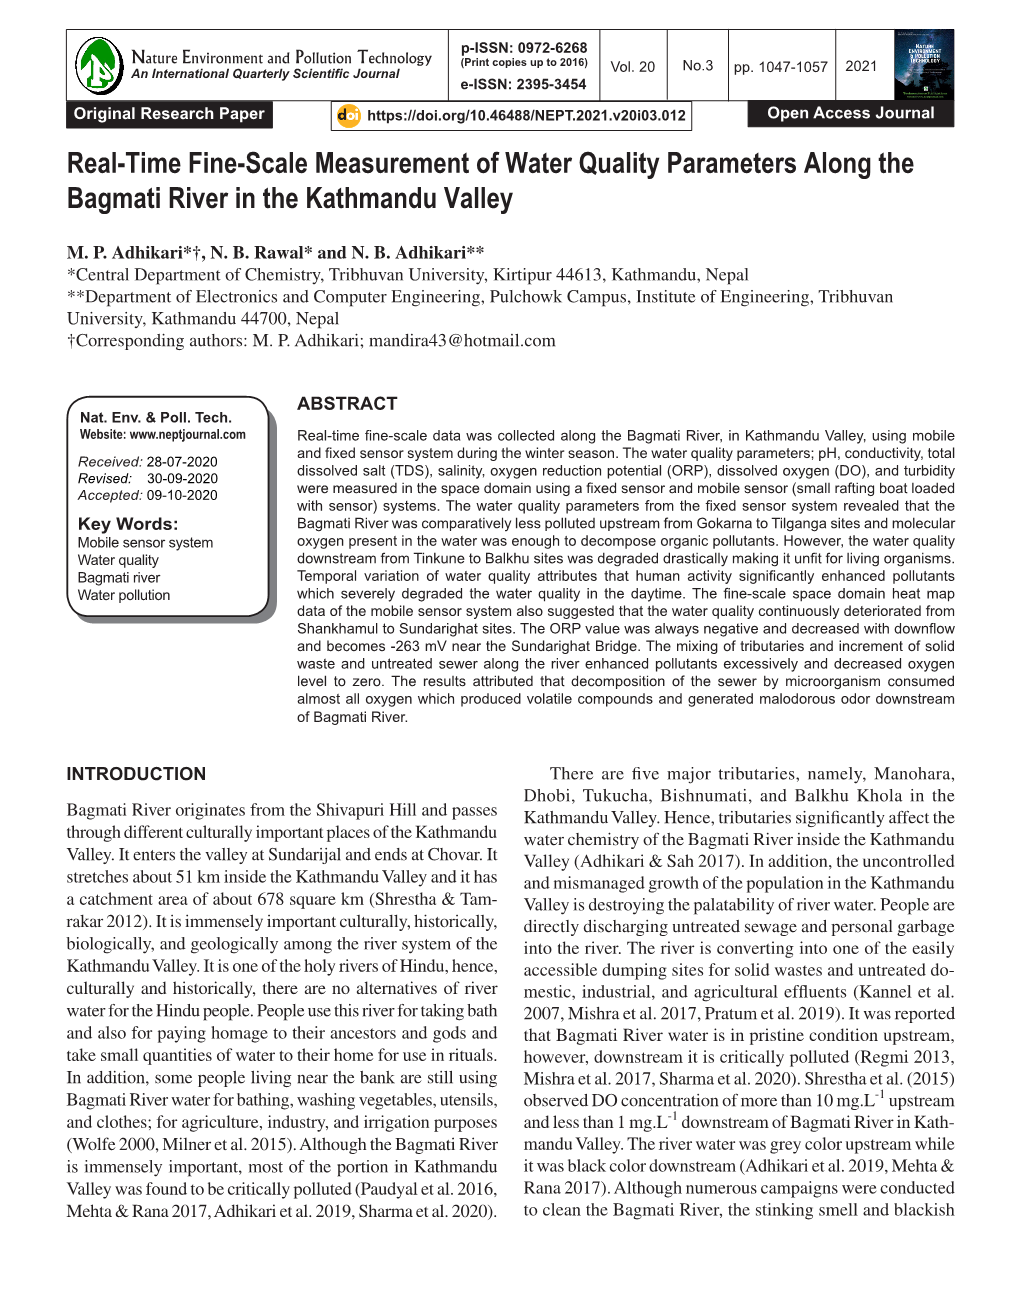 Real-Time Fine-Scale Measurement of Water Quality Parameters Along the Bagmati River in the Kathmandu Valley